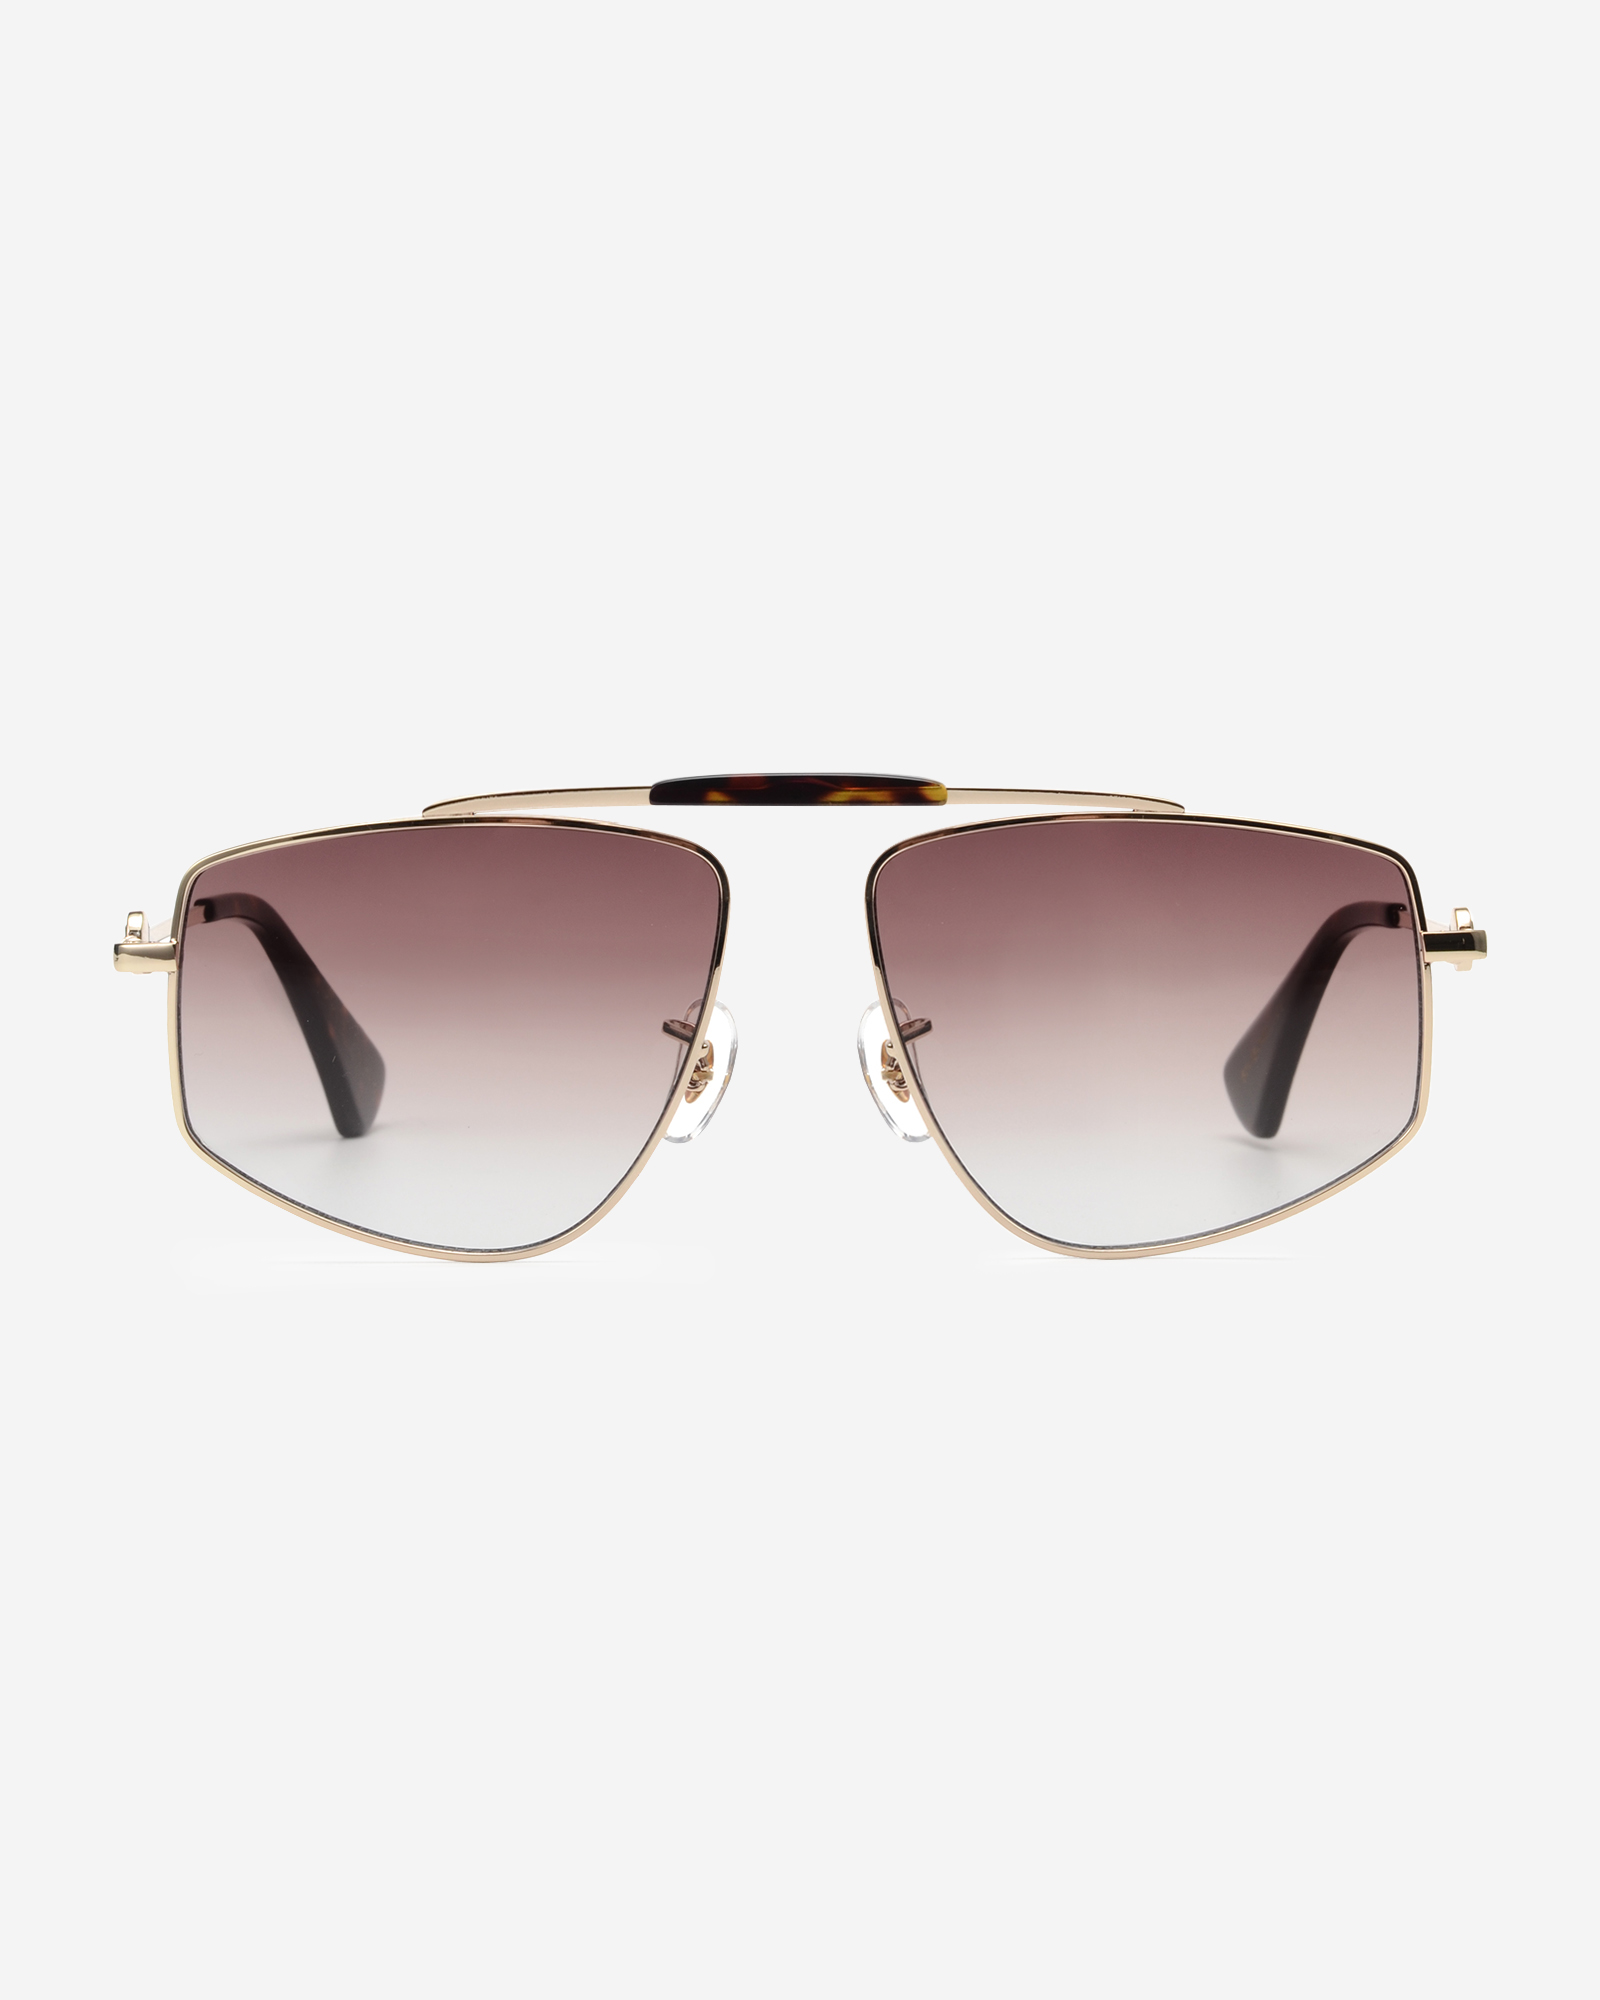 Squared sunglasses with steel frame